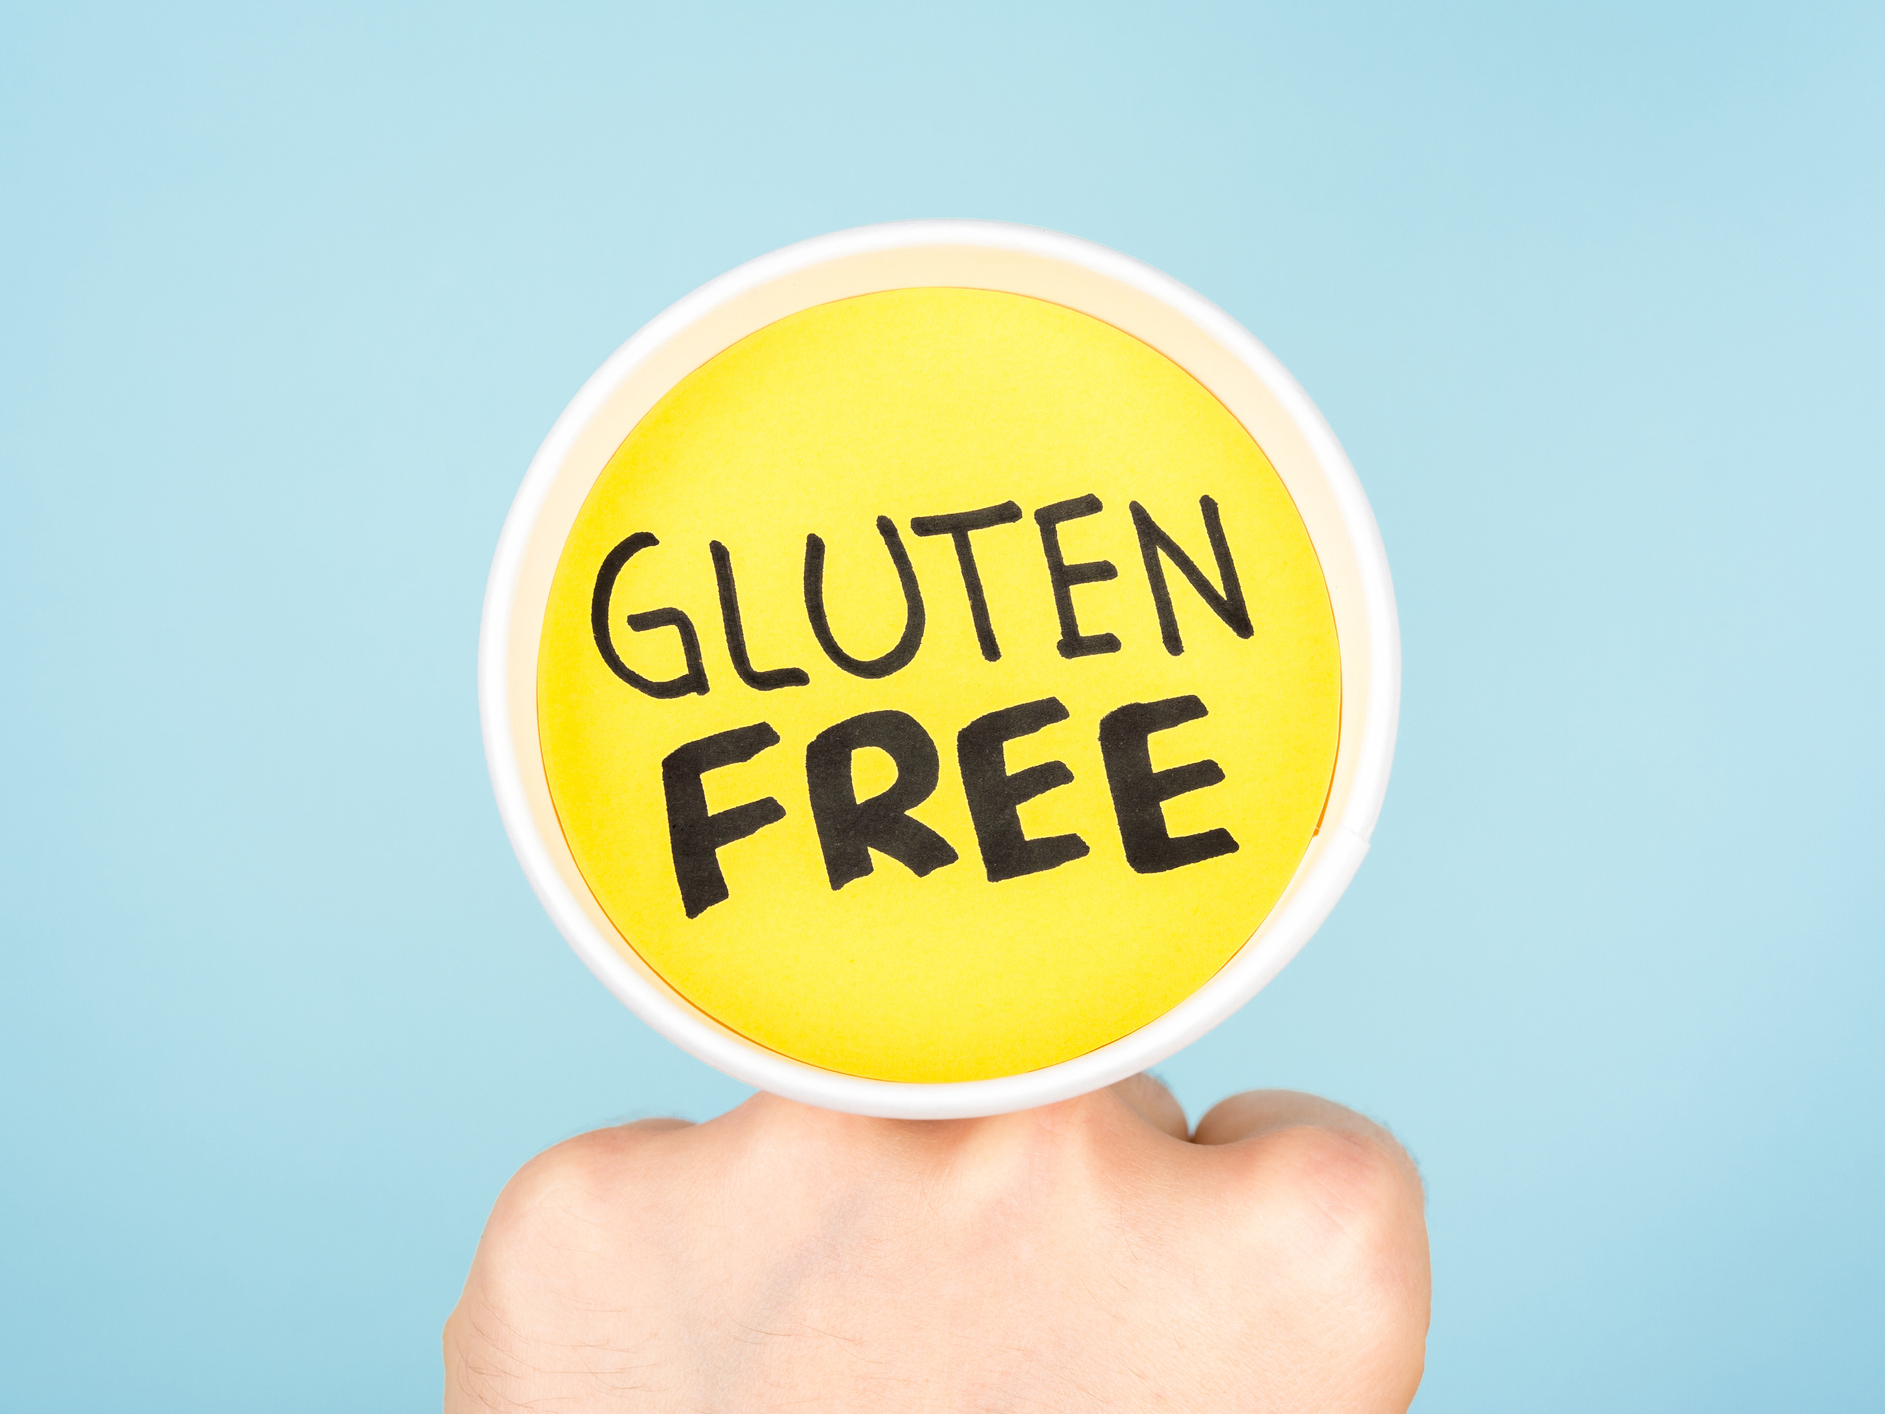 Going gluten free? Necessity for some, risky for others